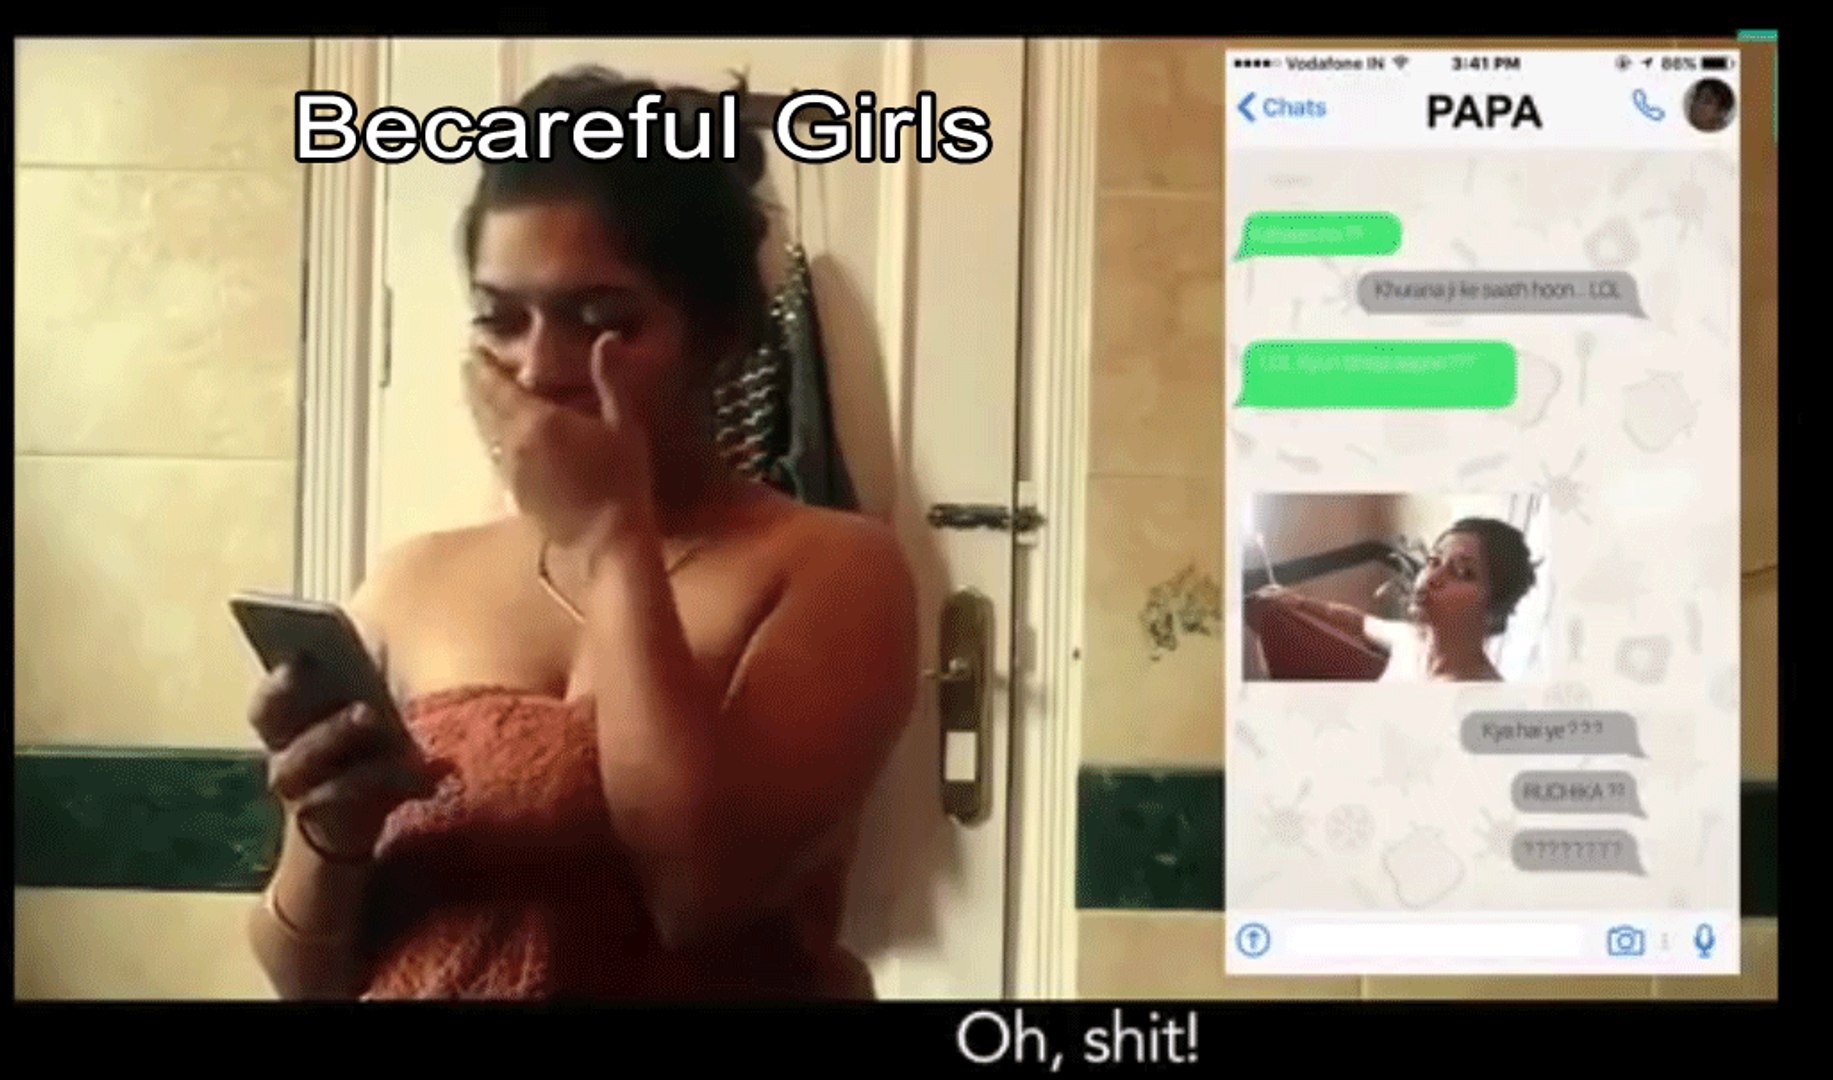 desiree wong recommends real girls sending nudes pic